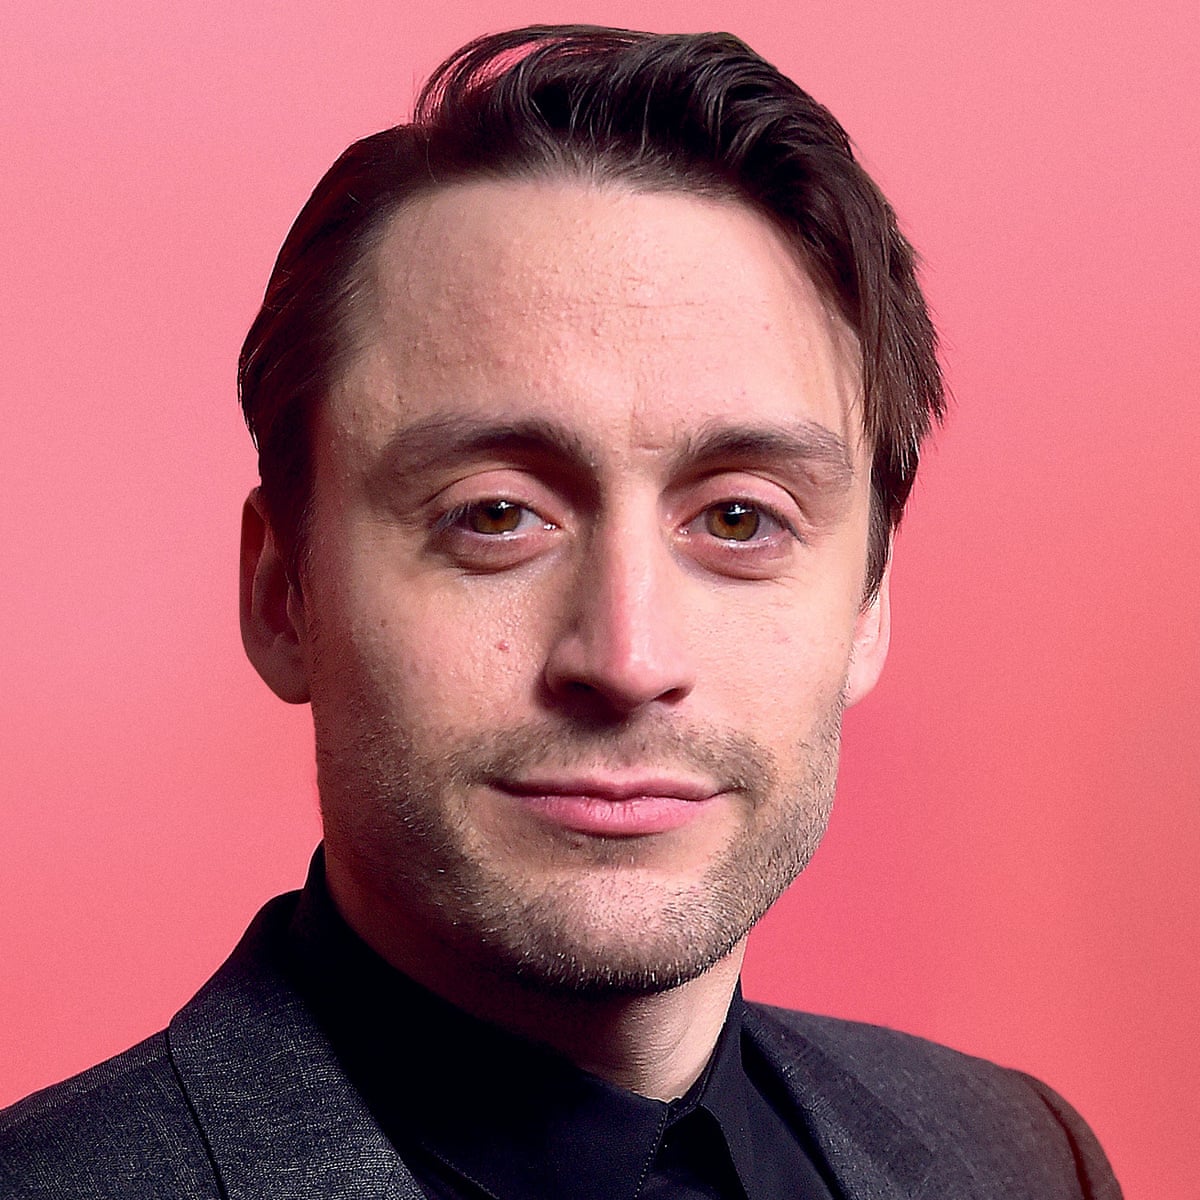 The 39-year old son of father (?) and mother(?) Kieran Culkin in 2022 photo. Kieran Culkin earned a  million dollar salary - leaving the net worth at  million in 2022